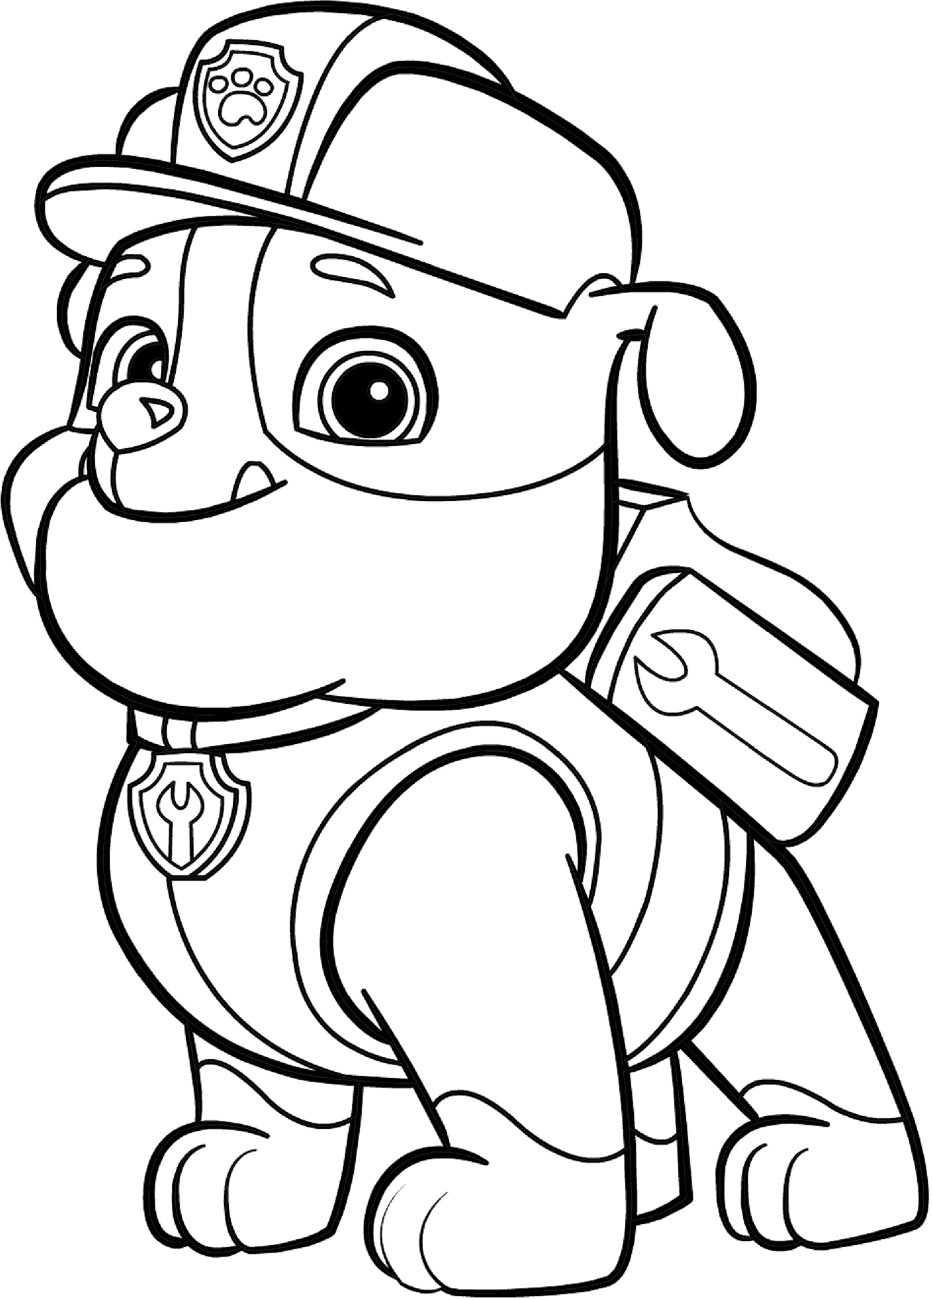 Rubble Coloring Pages - Free Printable Coloring Pages for Kids